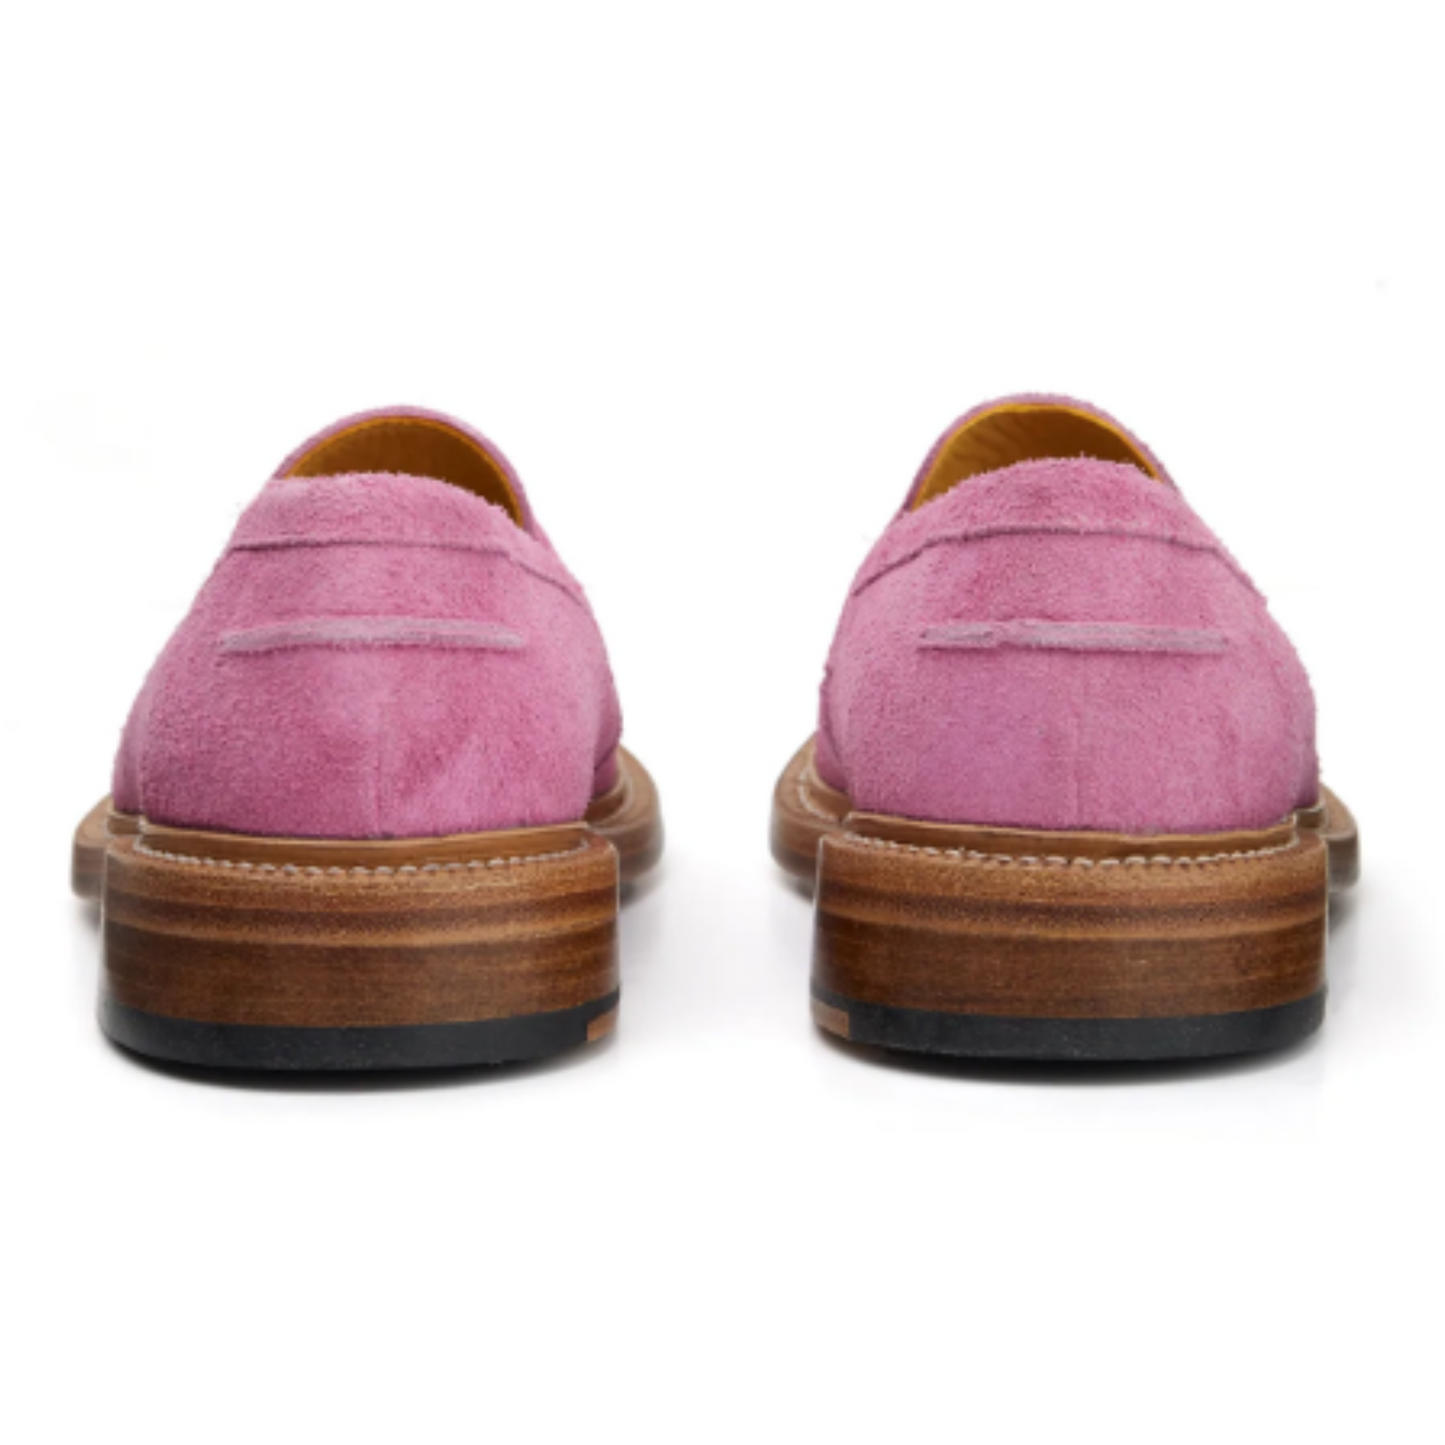 Tailor Made Handmade Pink Suede Tassels Slip On Moccasins Loafers Shoes